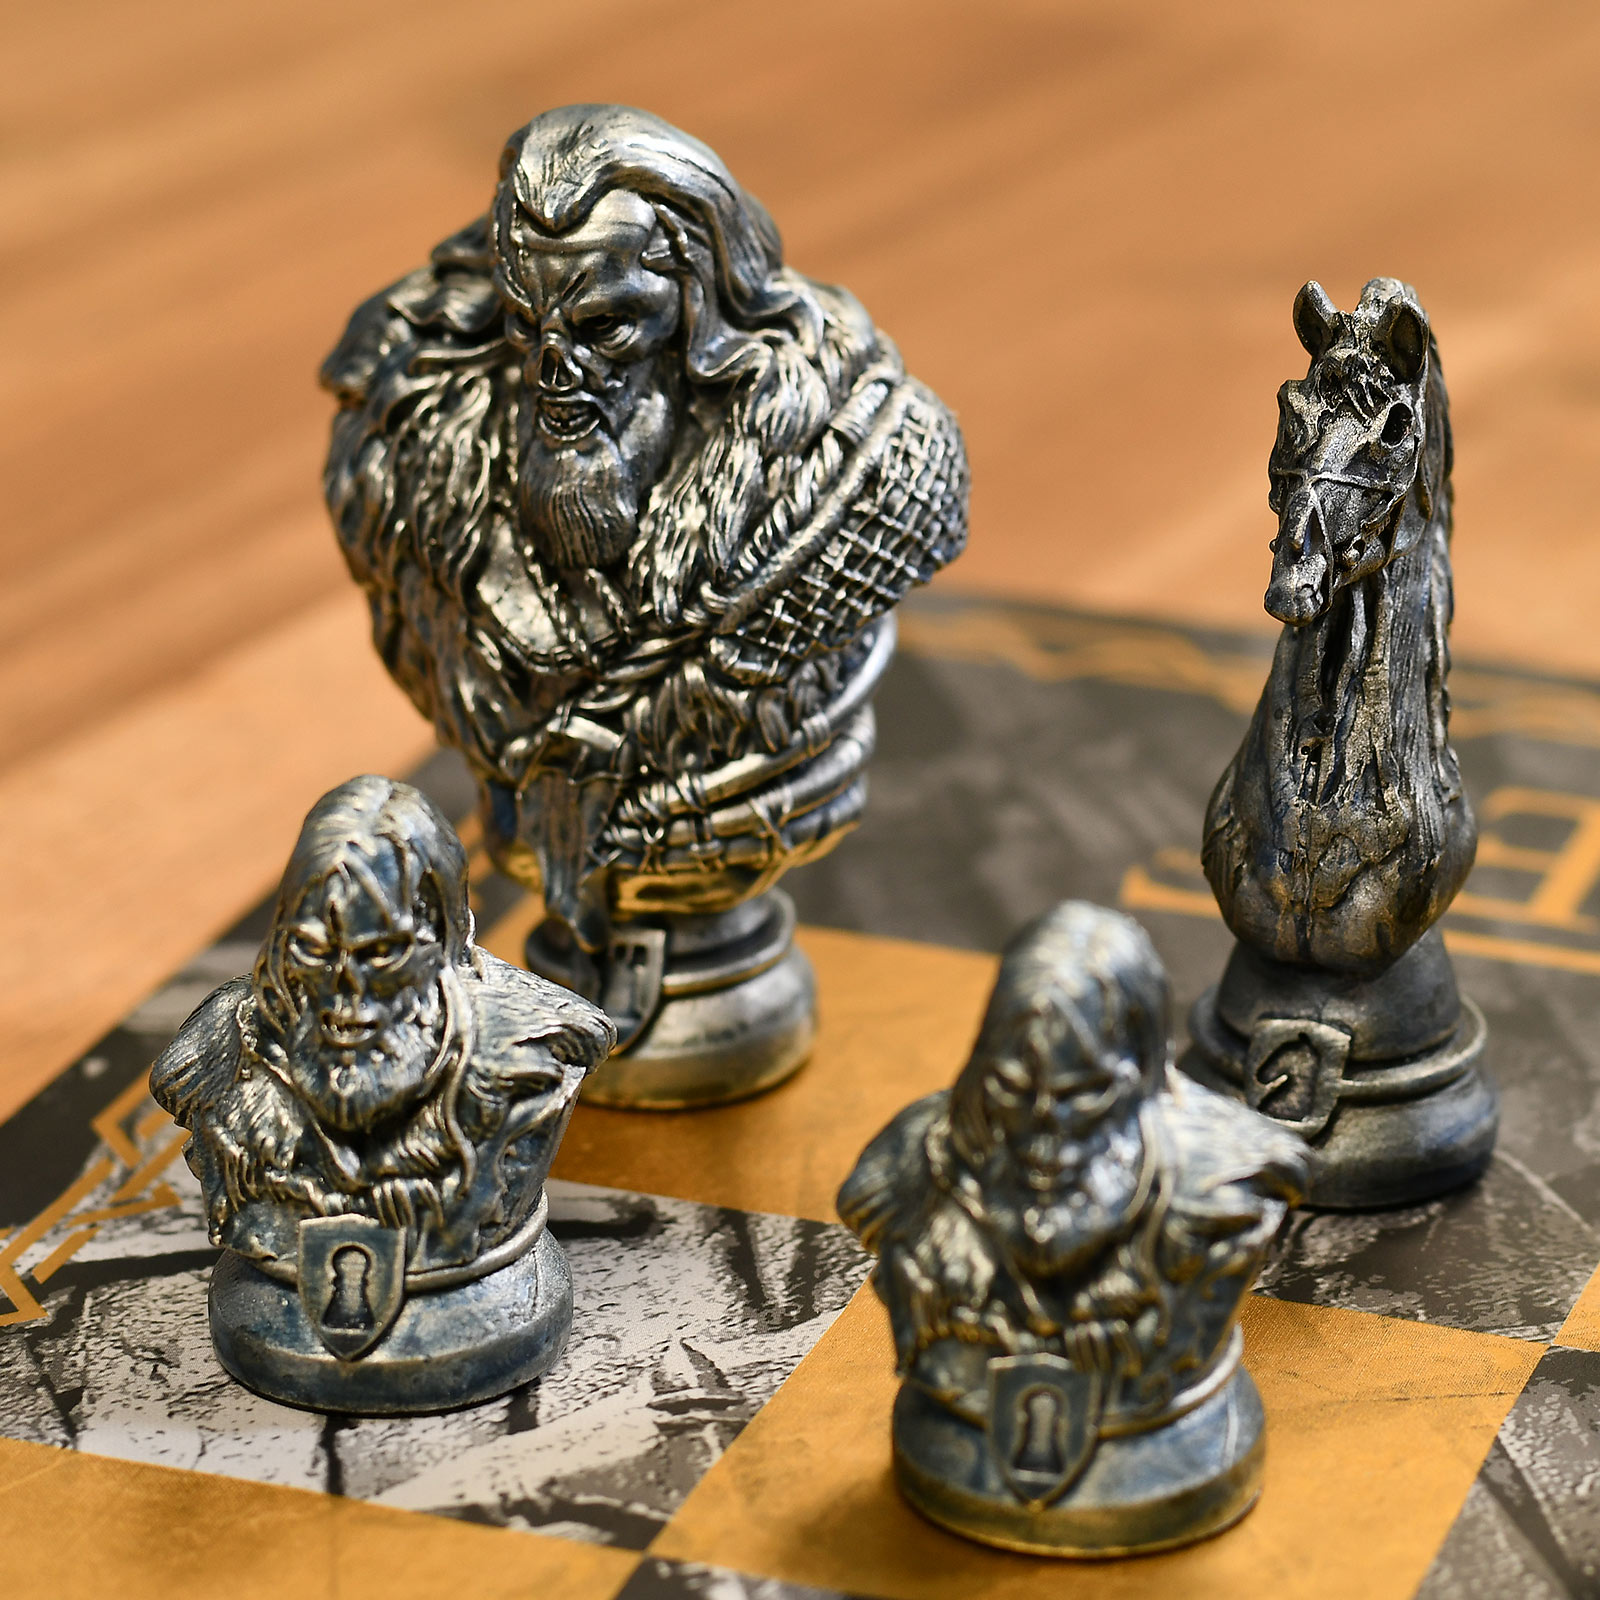 Game of Thrones - Chess Set Collectors Edition